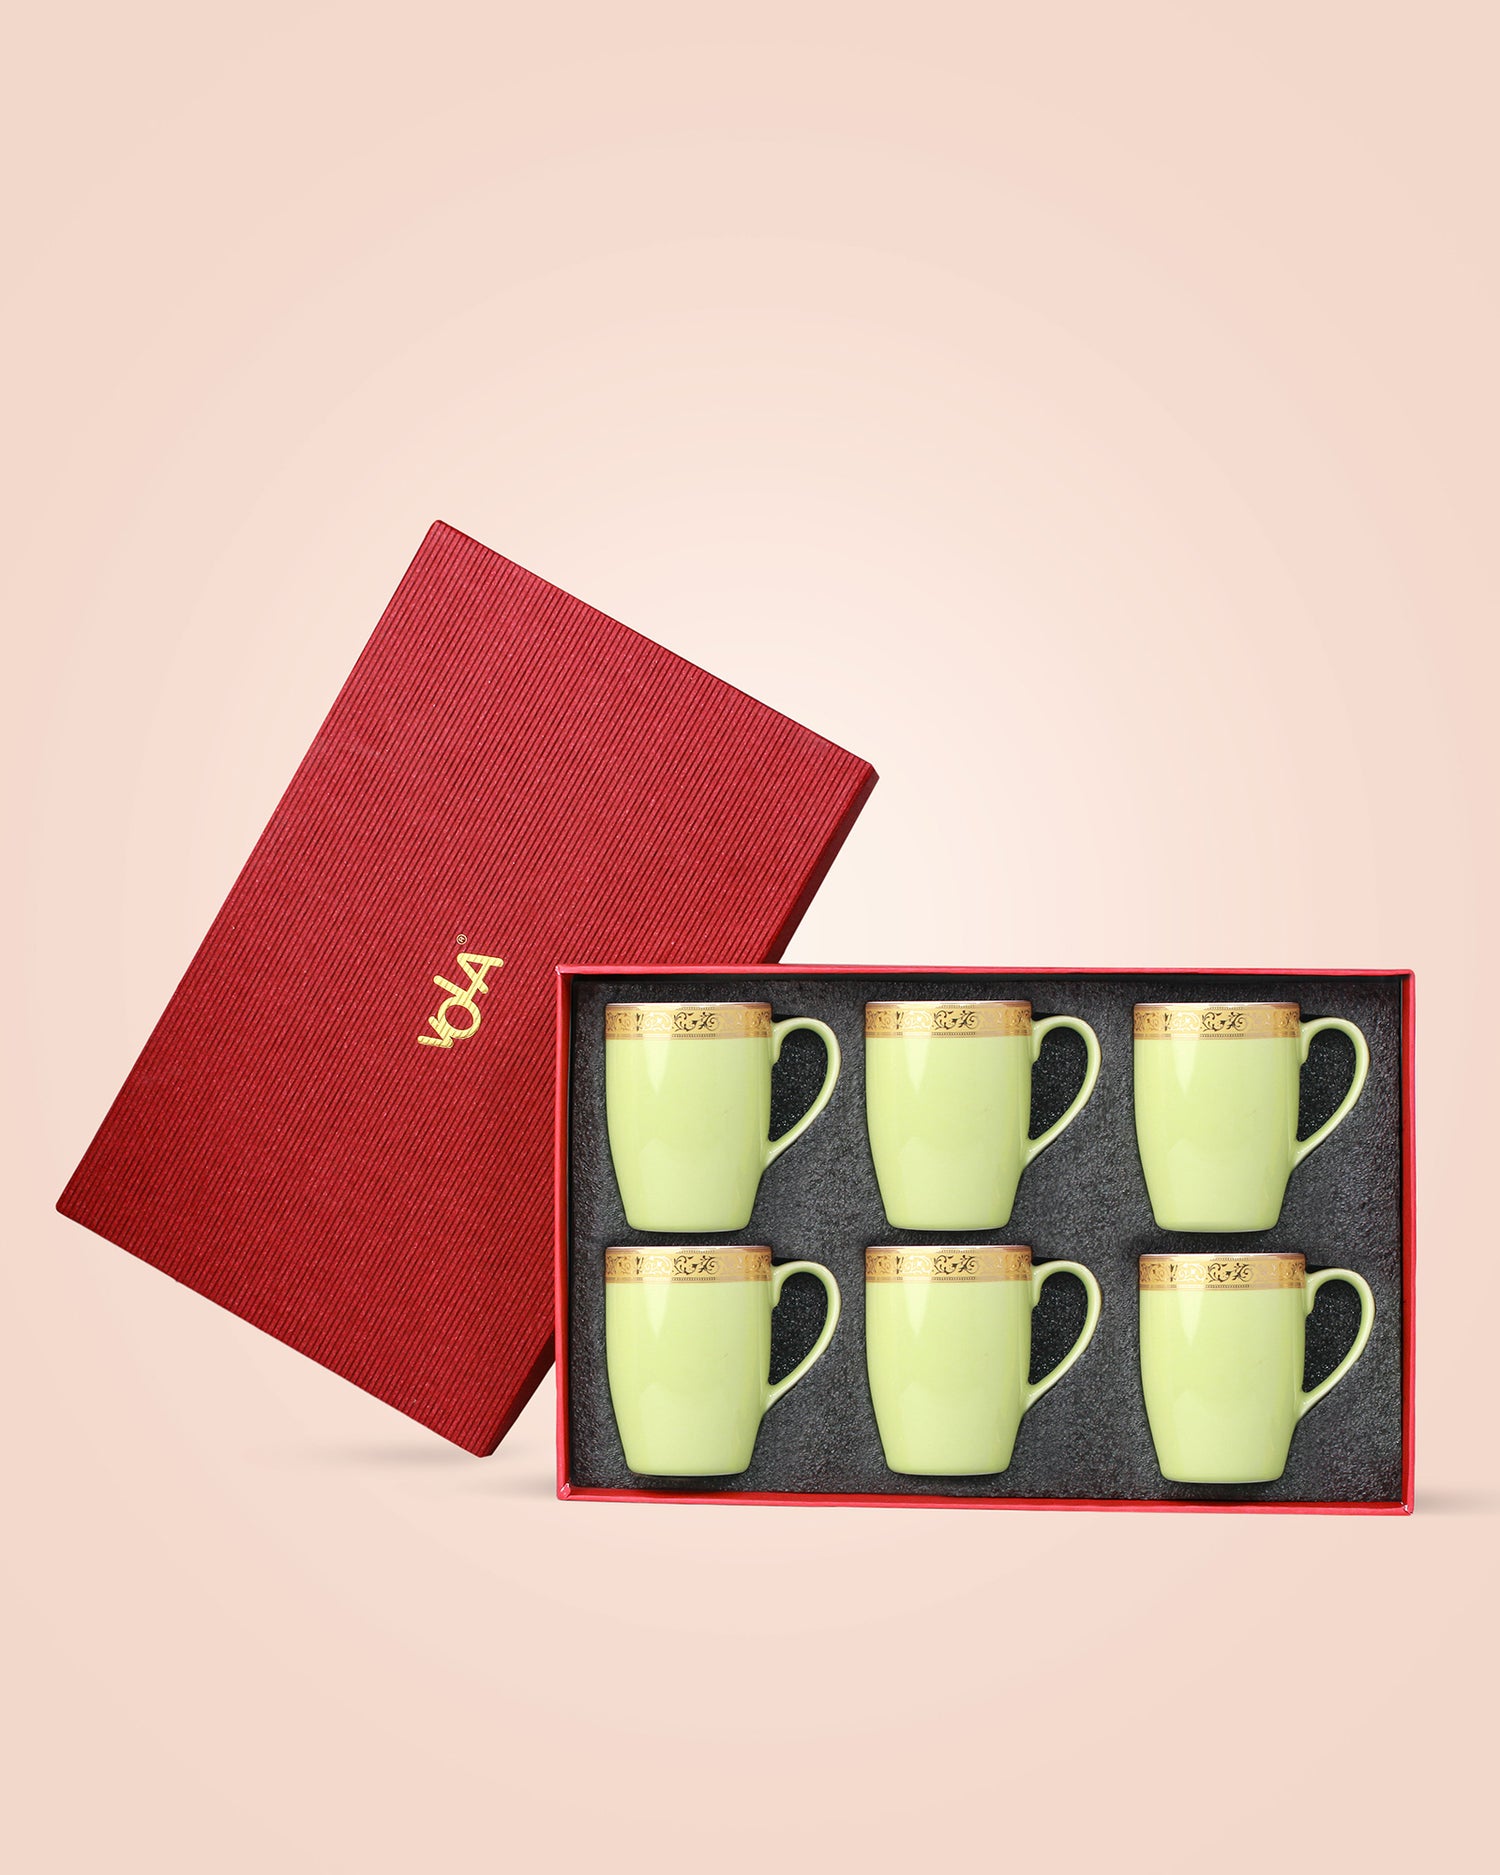 LILLY GREEN / Set of 6 * 230ml || Scarlet: Premium Porcelain Mugs in Pastel Colors